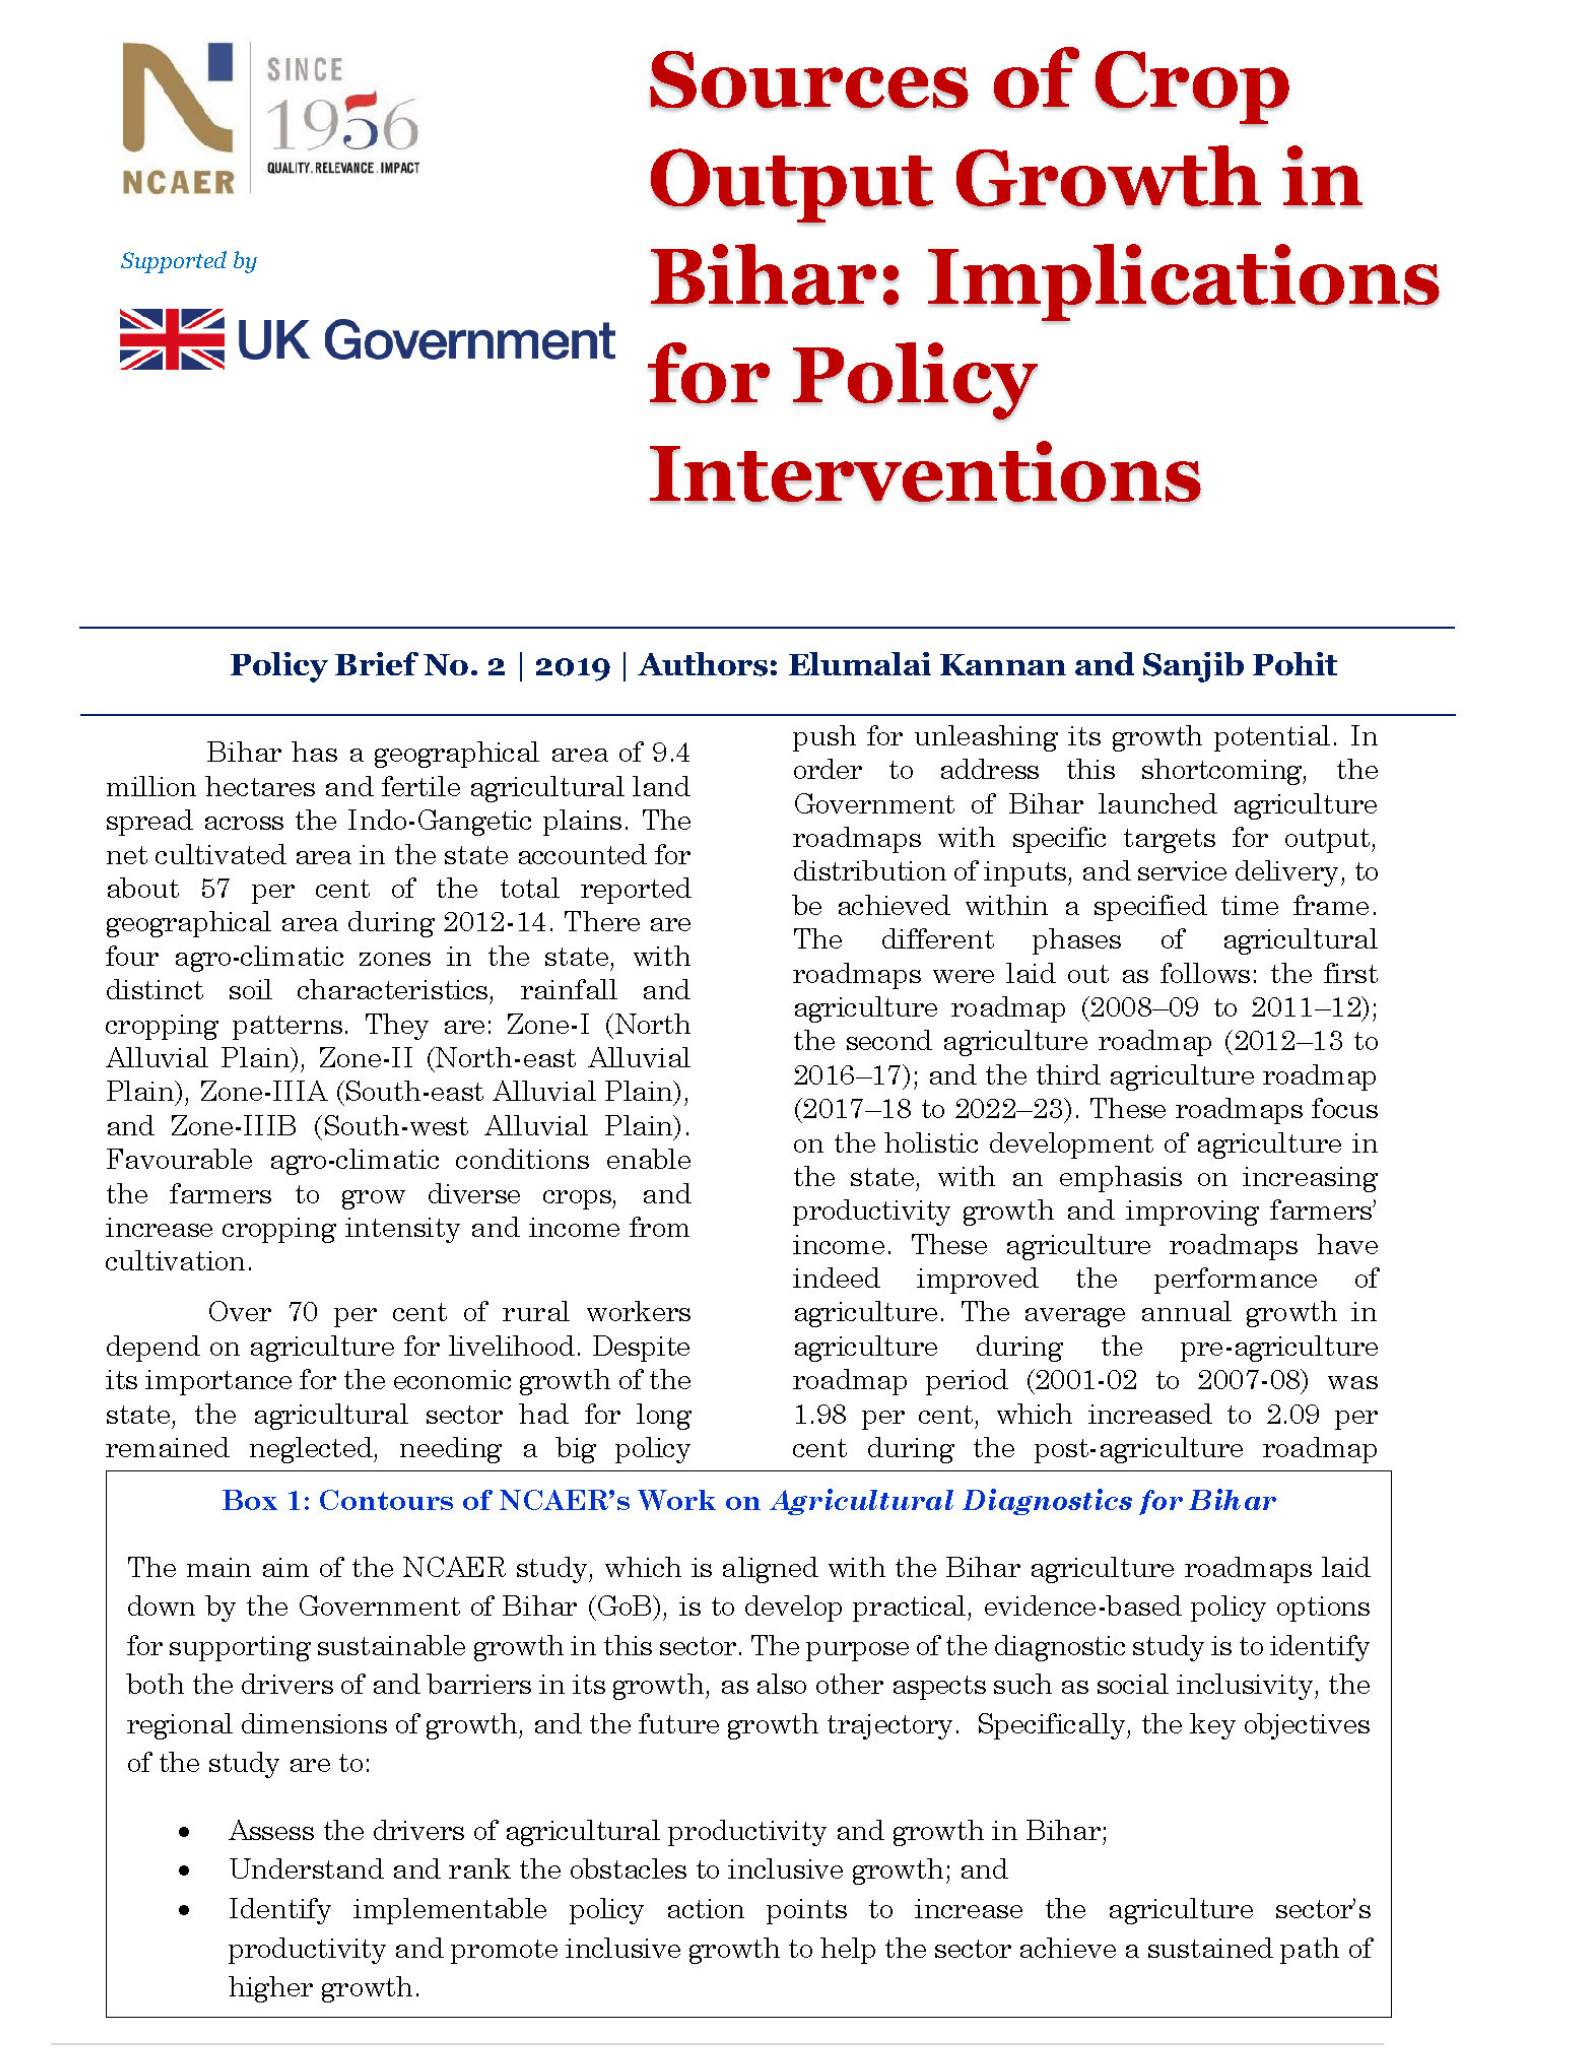 Sources of Crop Output Growth in Bihar: Implications for Policy Interventions